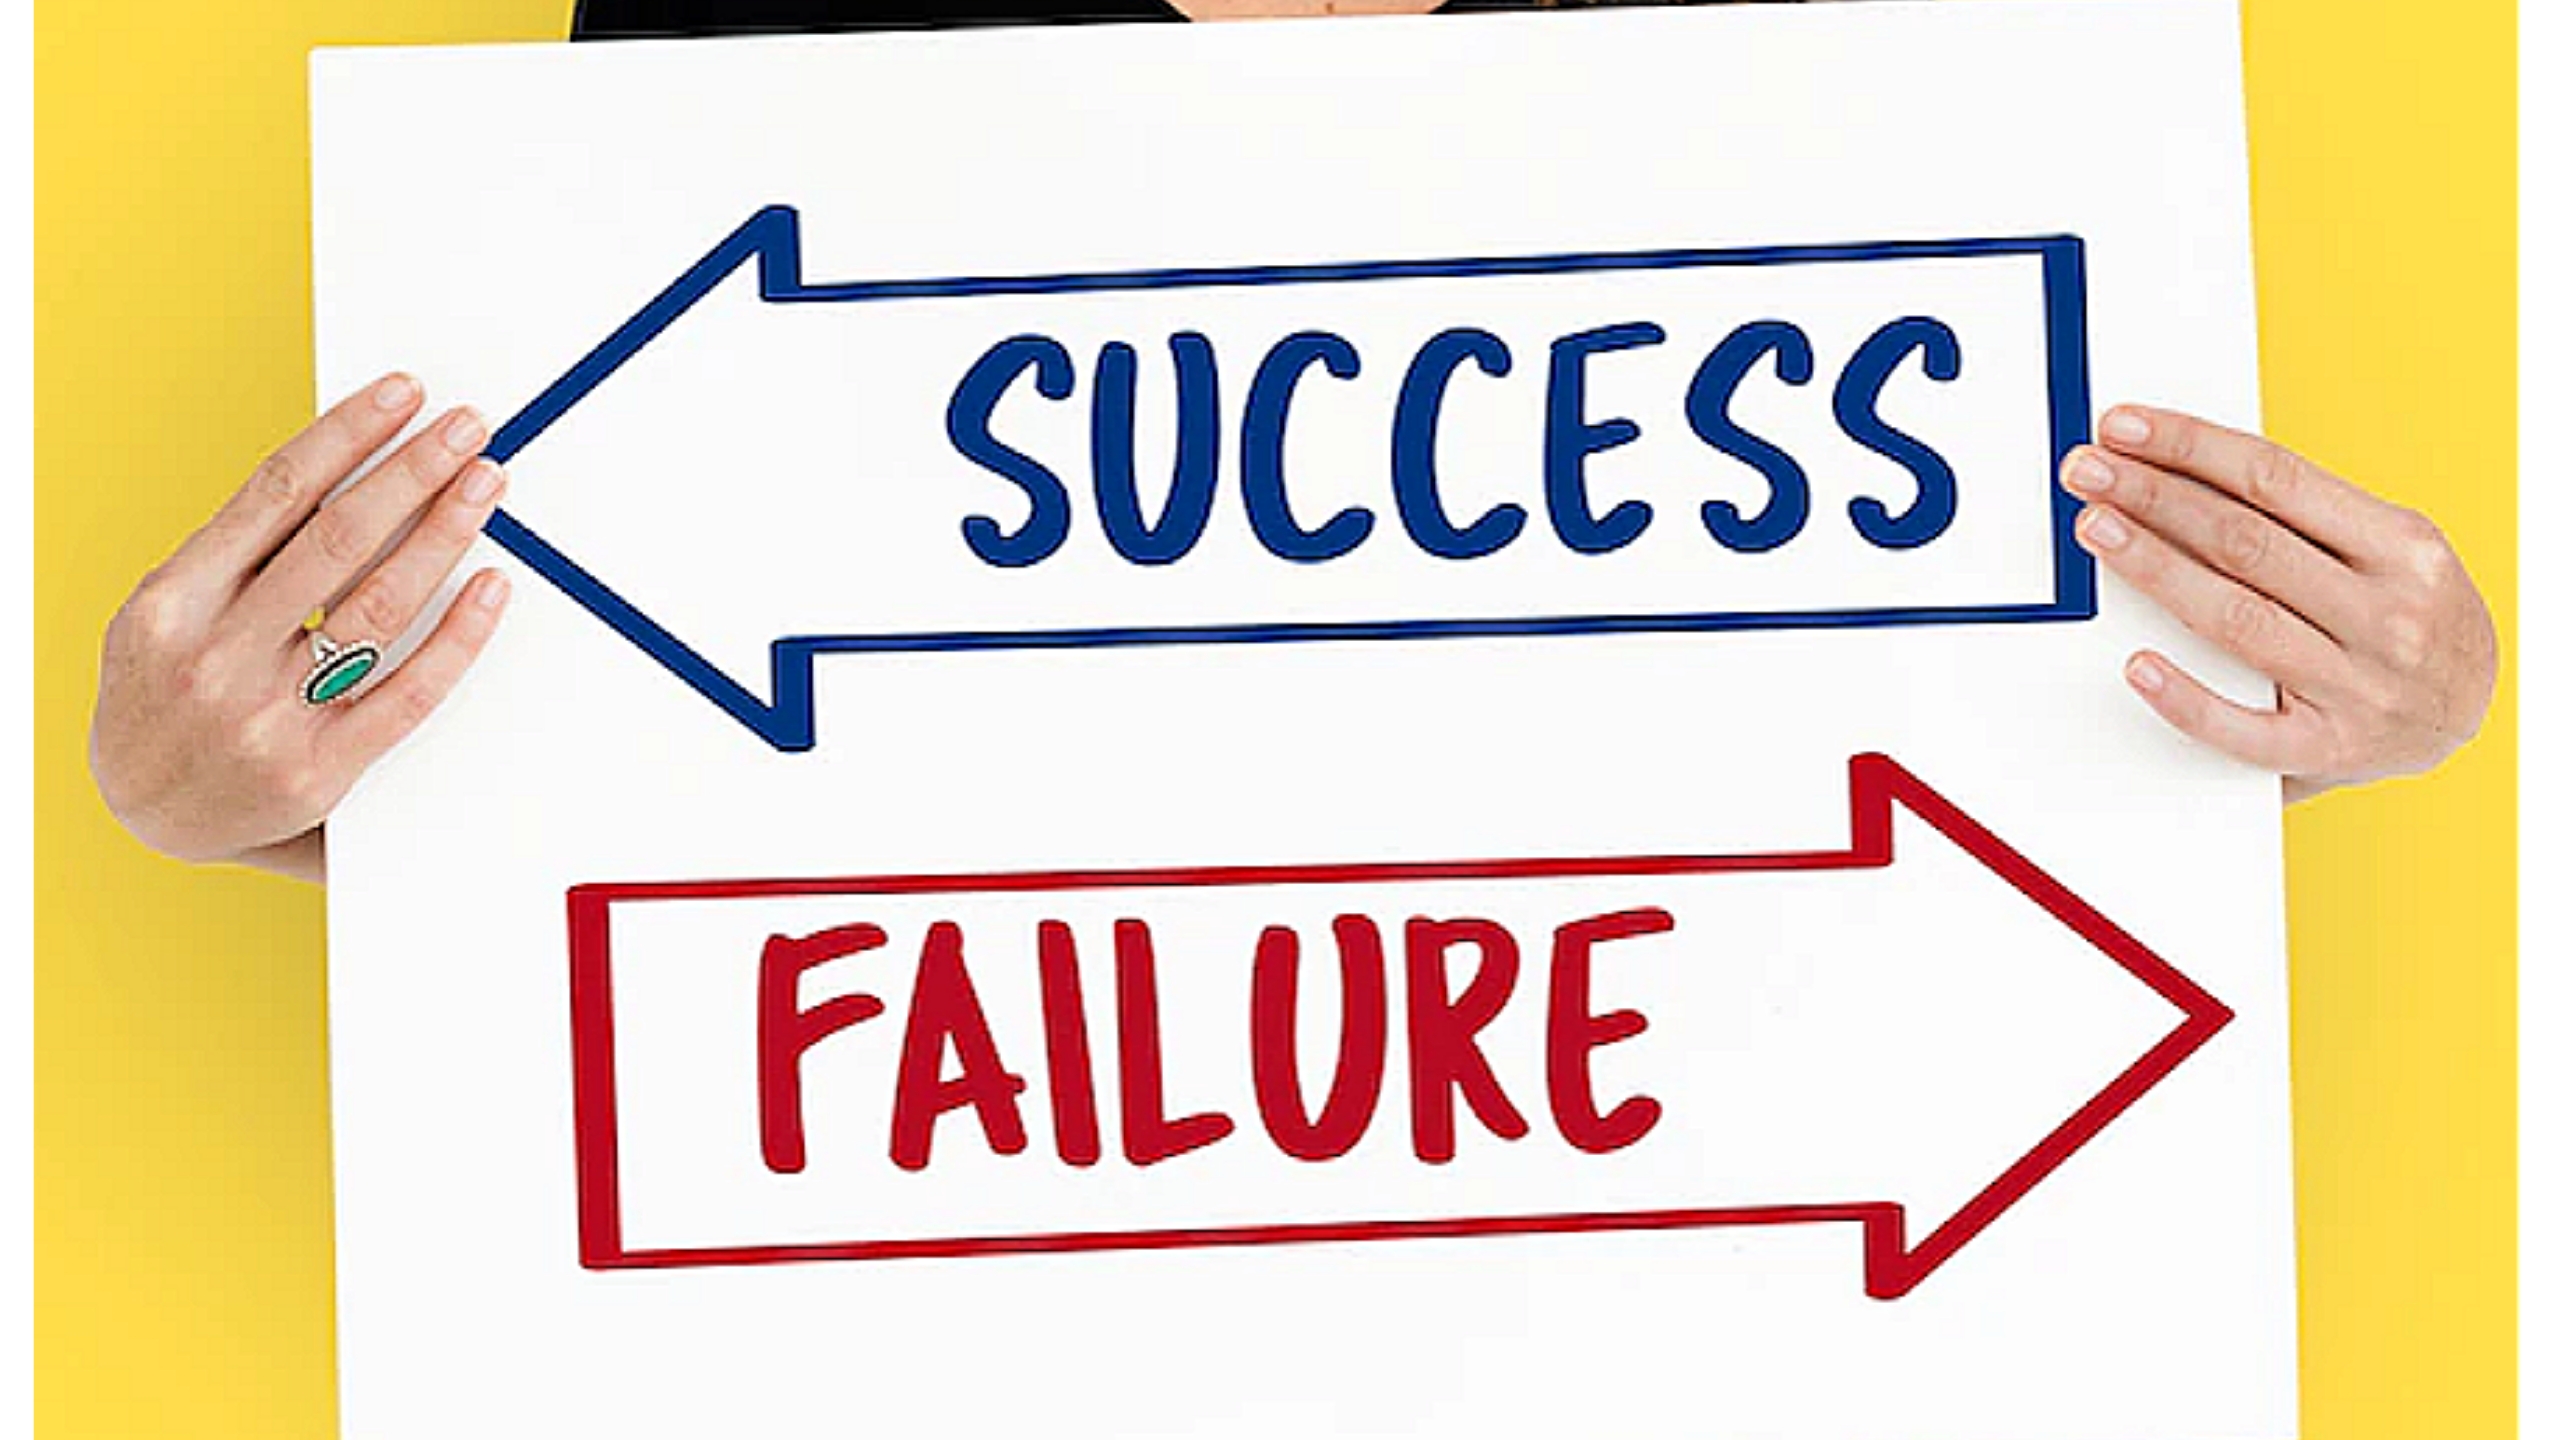 How To Overcome Fear Of Failure: 10 Proven Strategies - Bscholarly